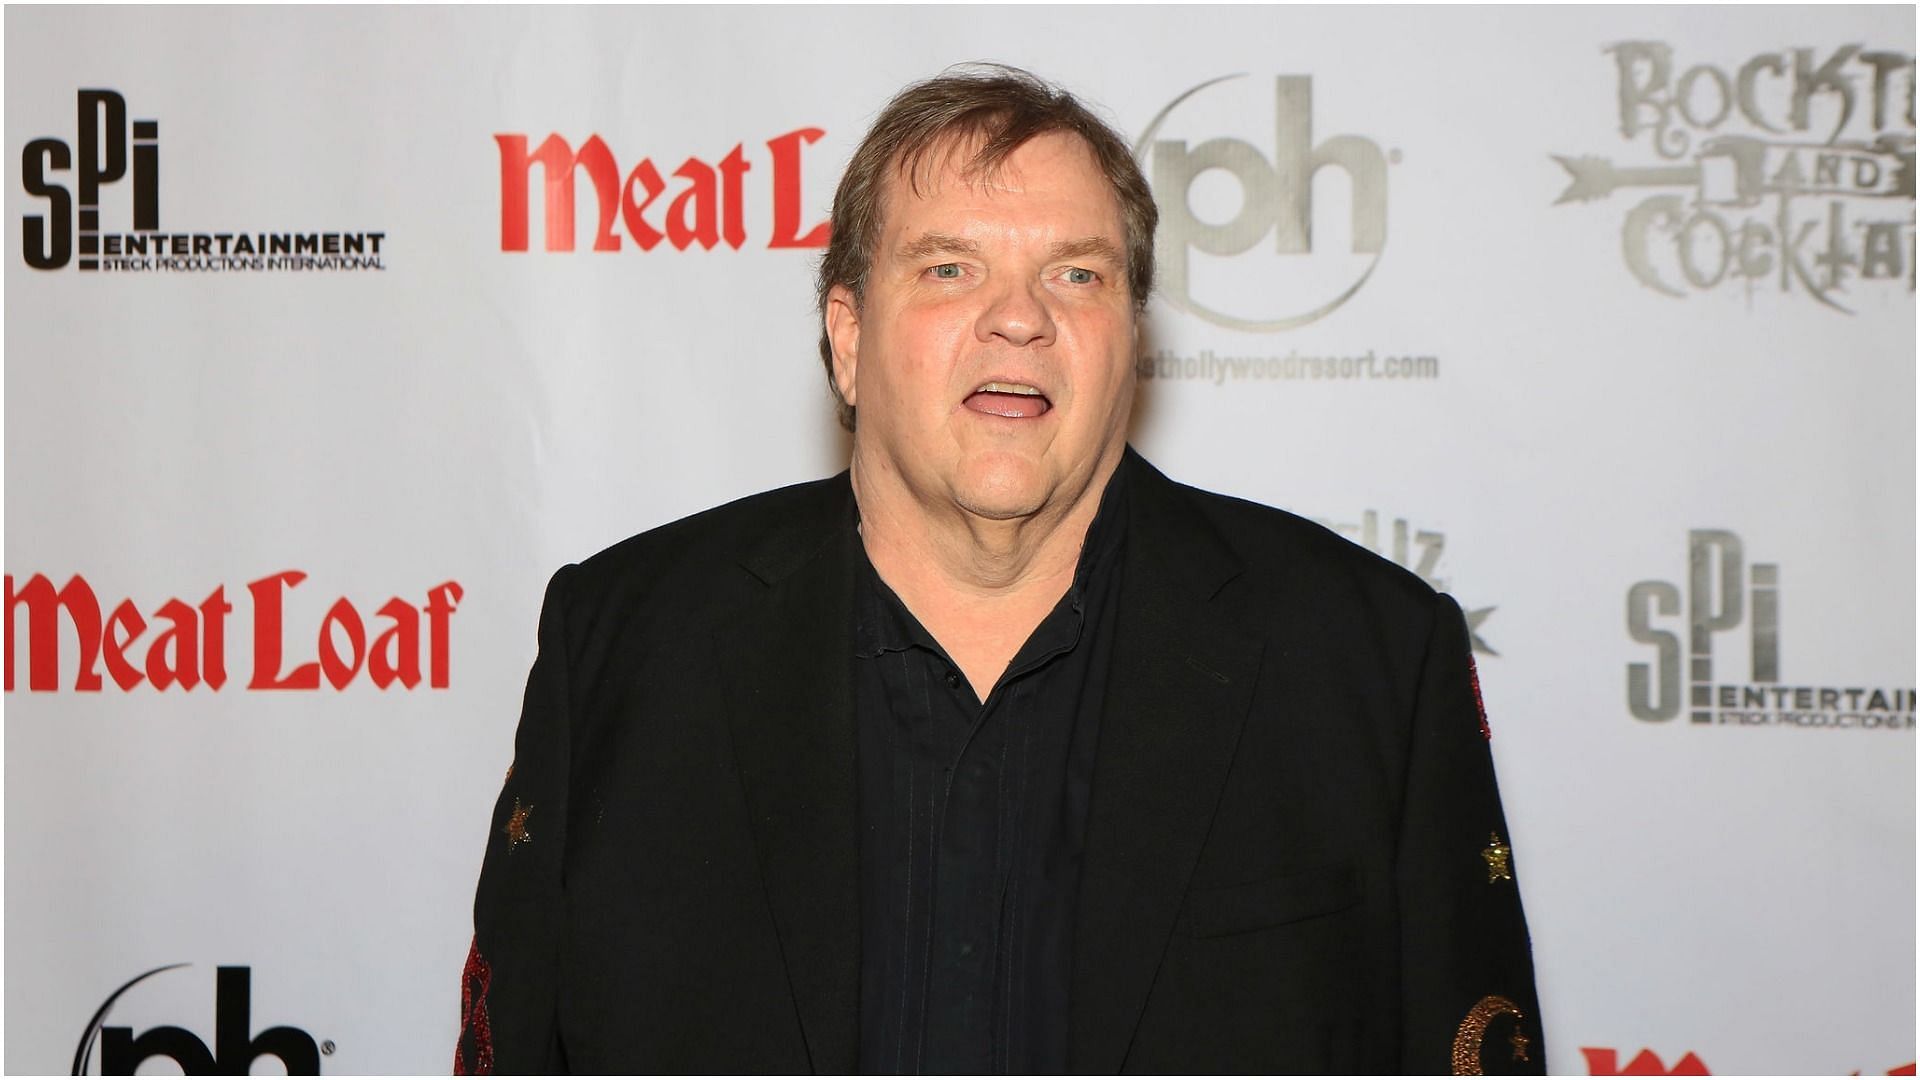 Meat Loaf recently died at the age of 91 (Image via Gabe Ginsberg/Getty Images)